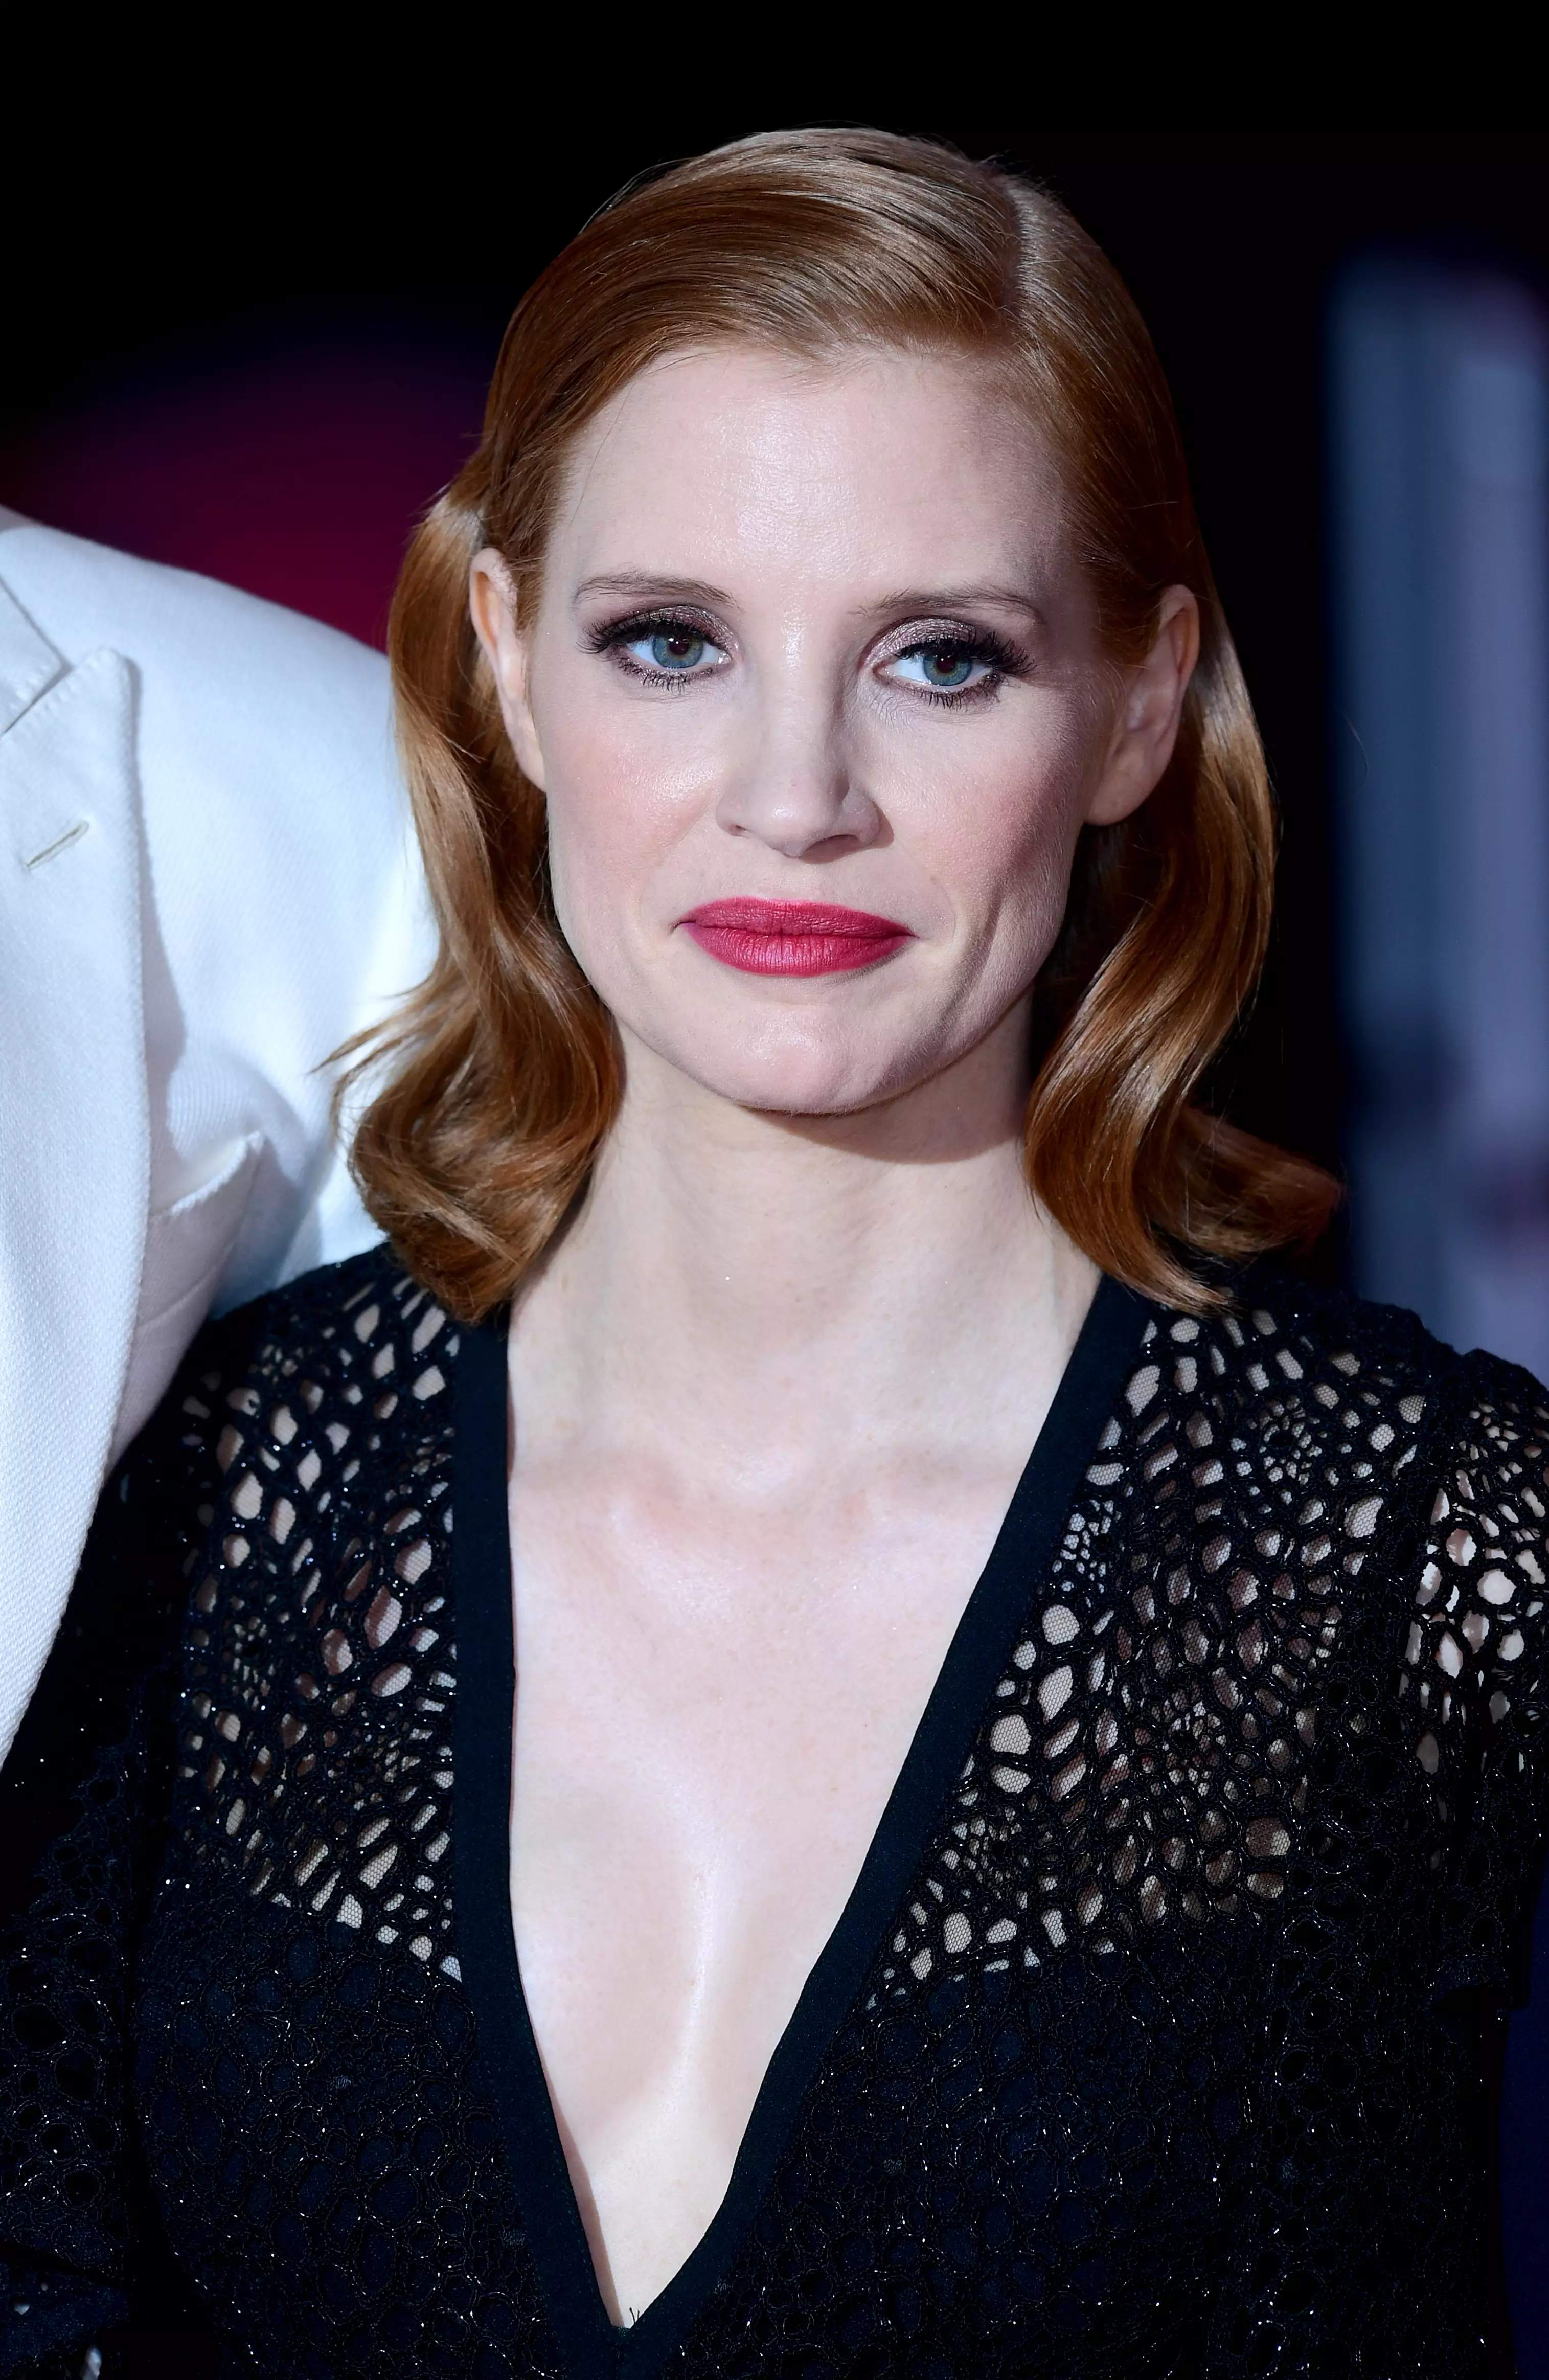 Jessica Chastain will depict xx (